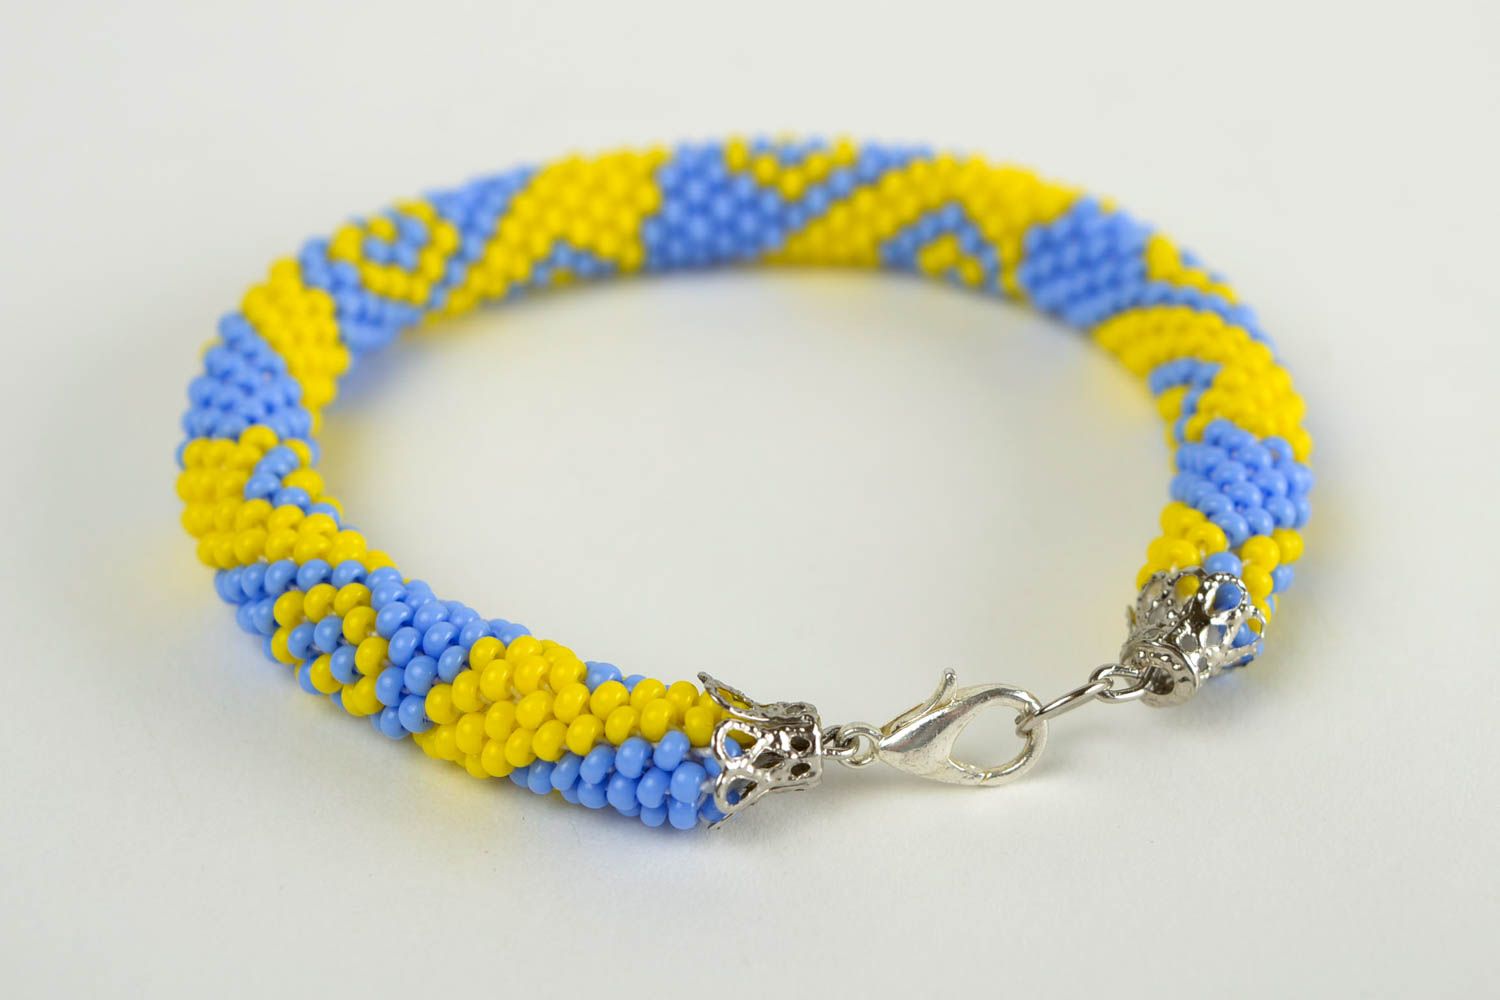 Handmade beaded cord bracelet in yellow and blue colors for women photo 5